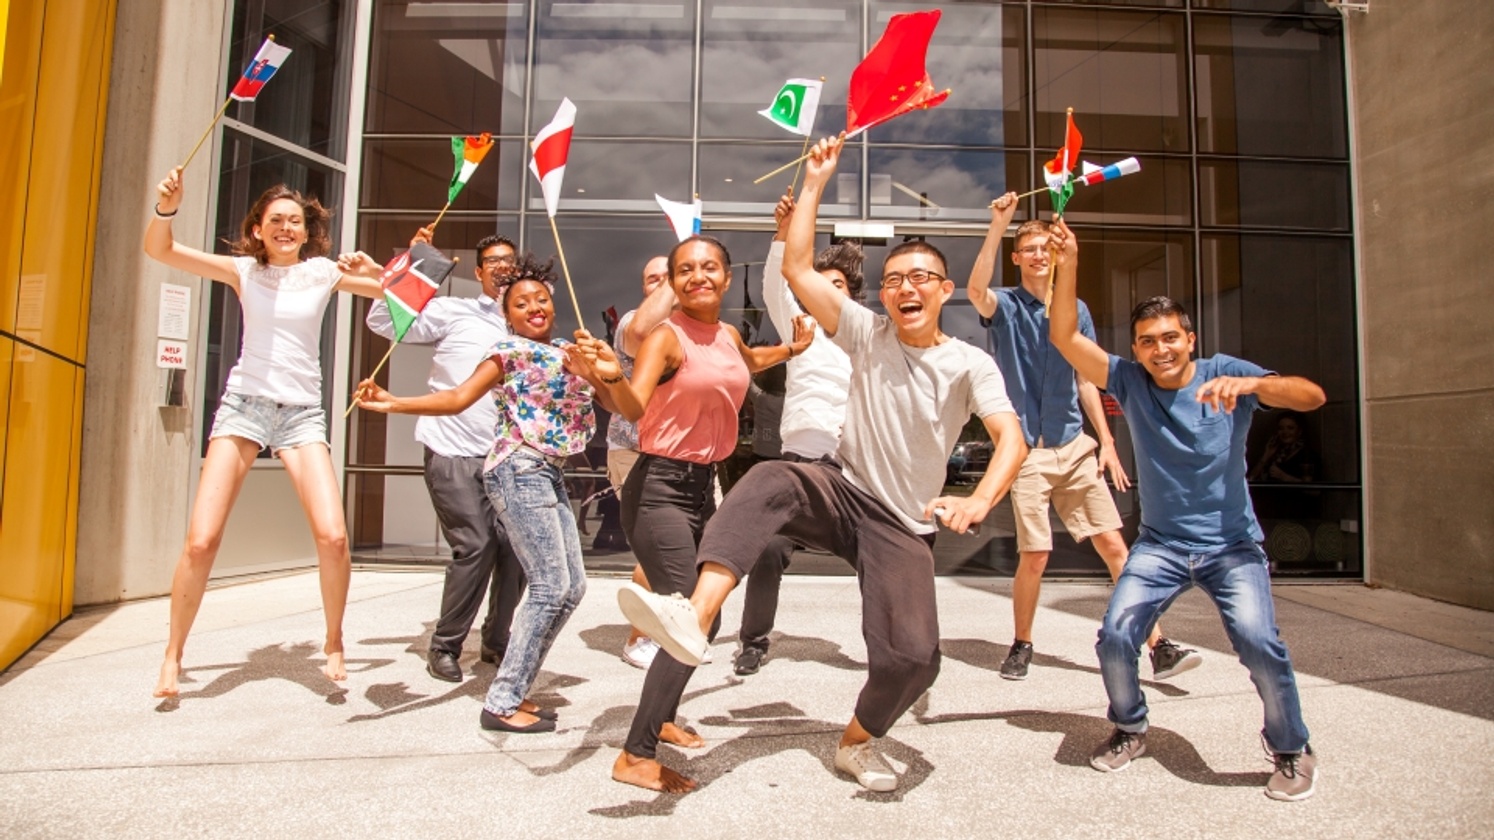 Students dancing with international flags